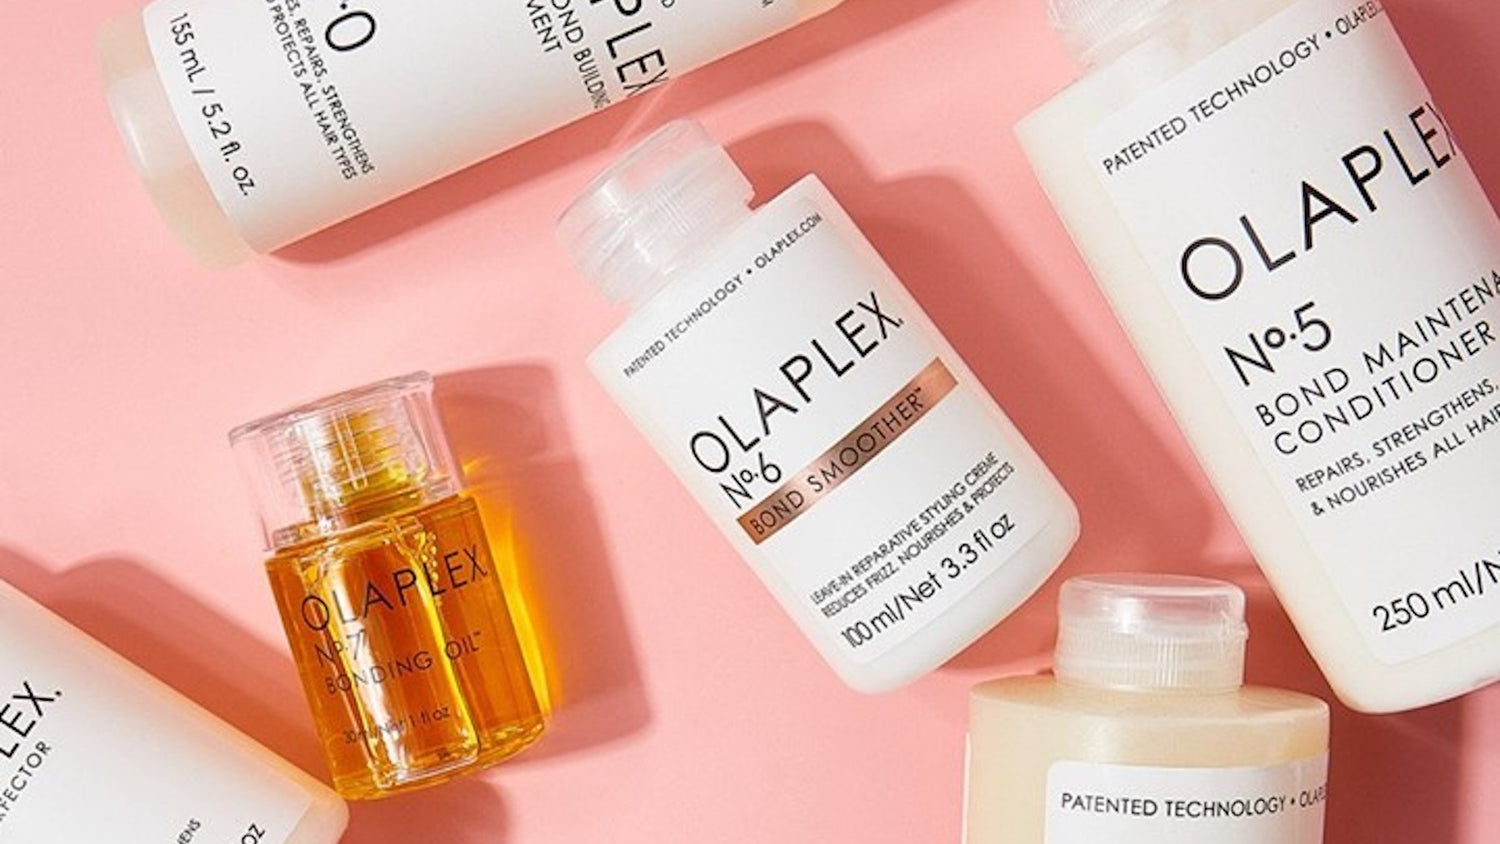 The Best Olaplex Products To Add To Your Healthy Hair Routine